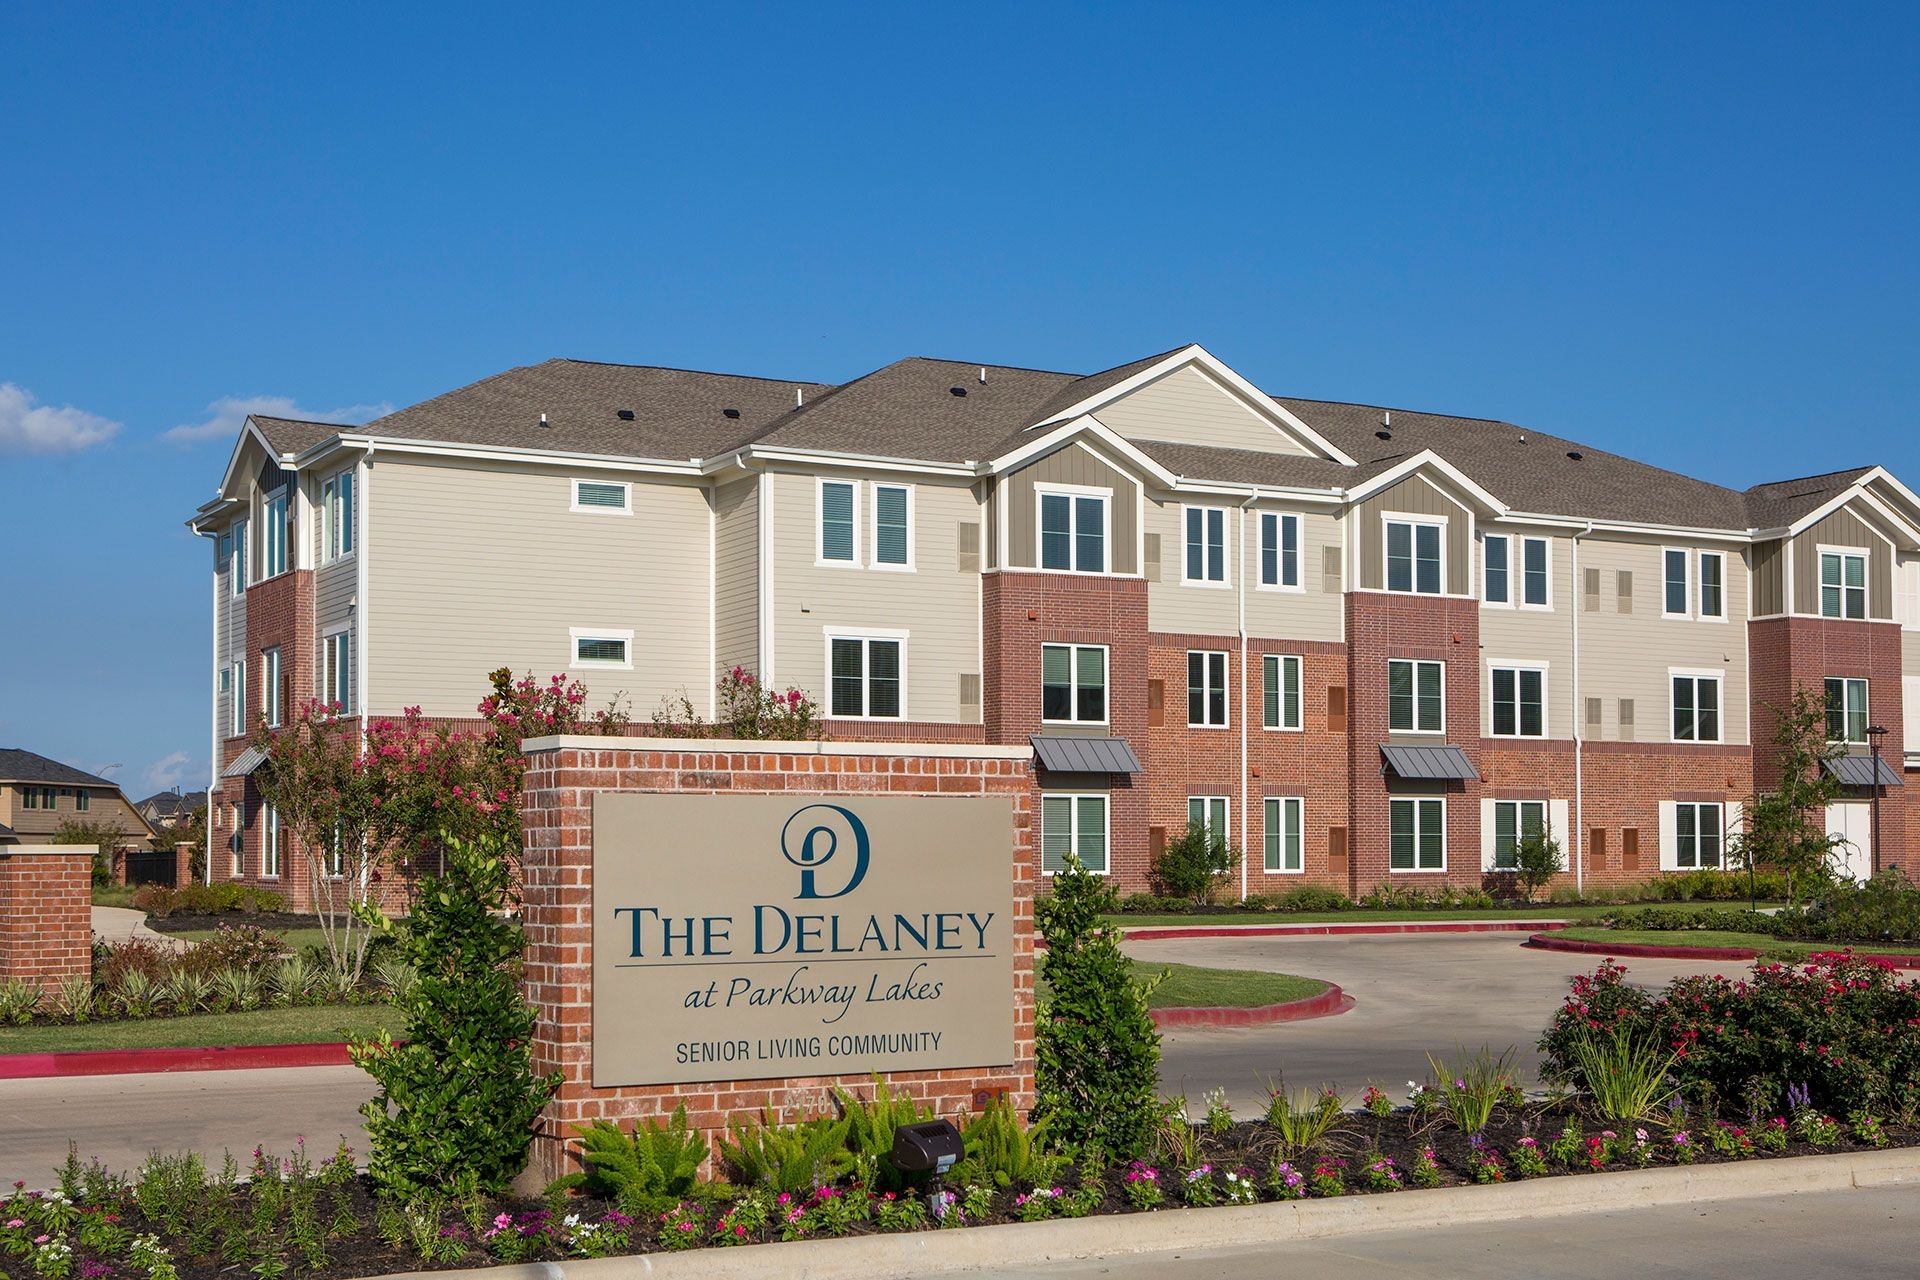 The Delaney at Parkway Lakes image